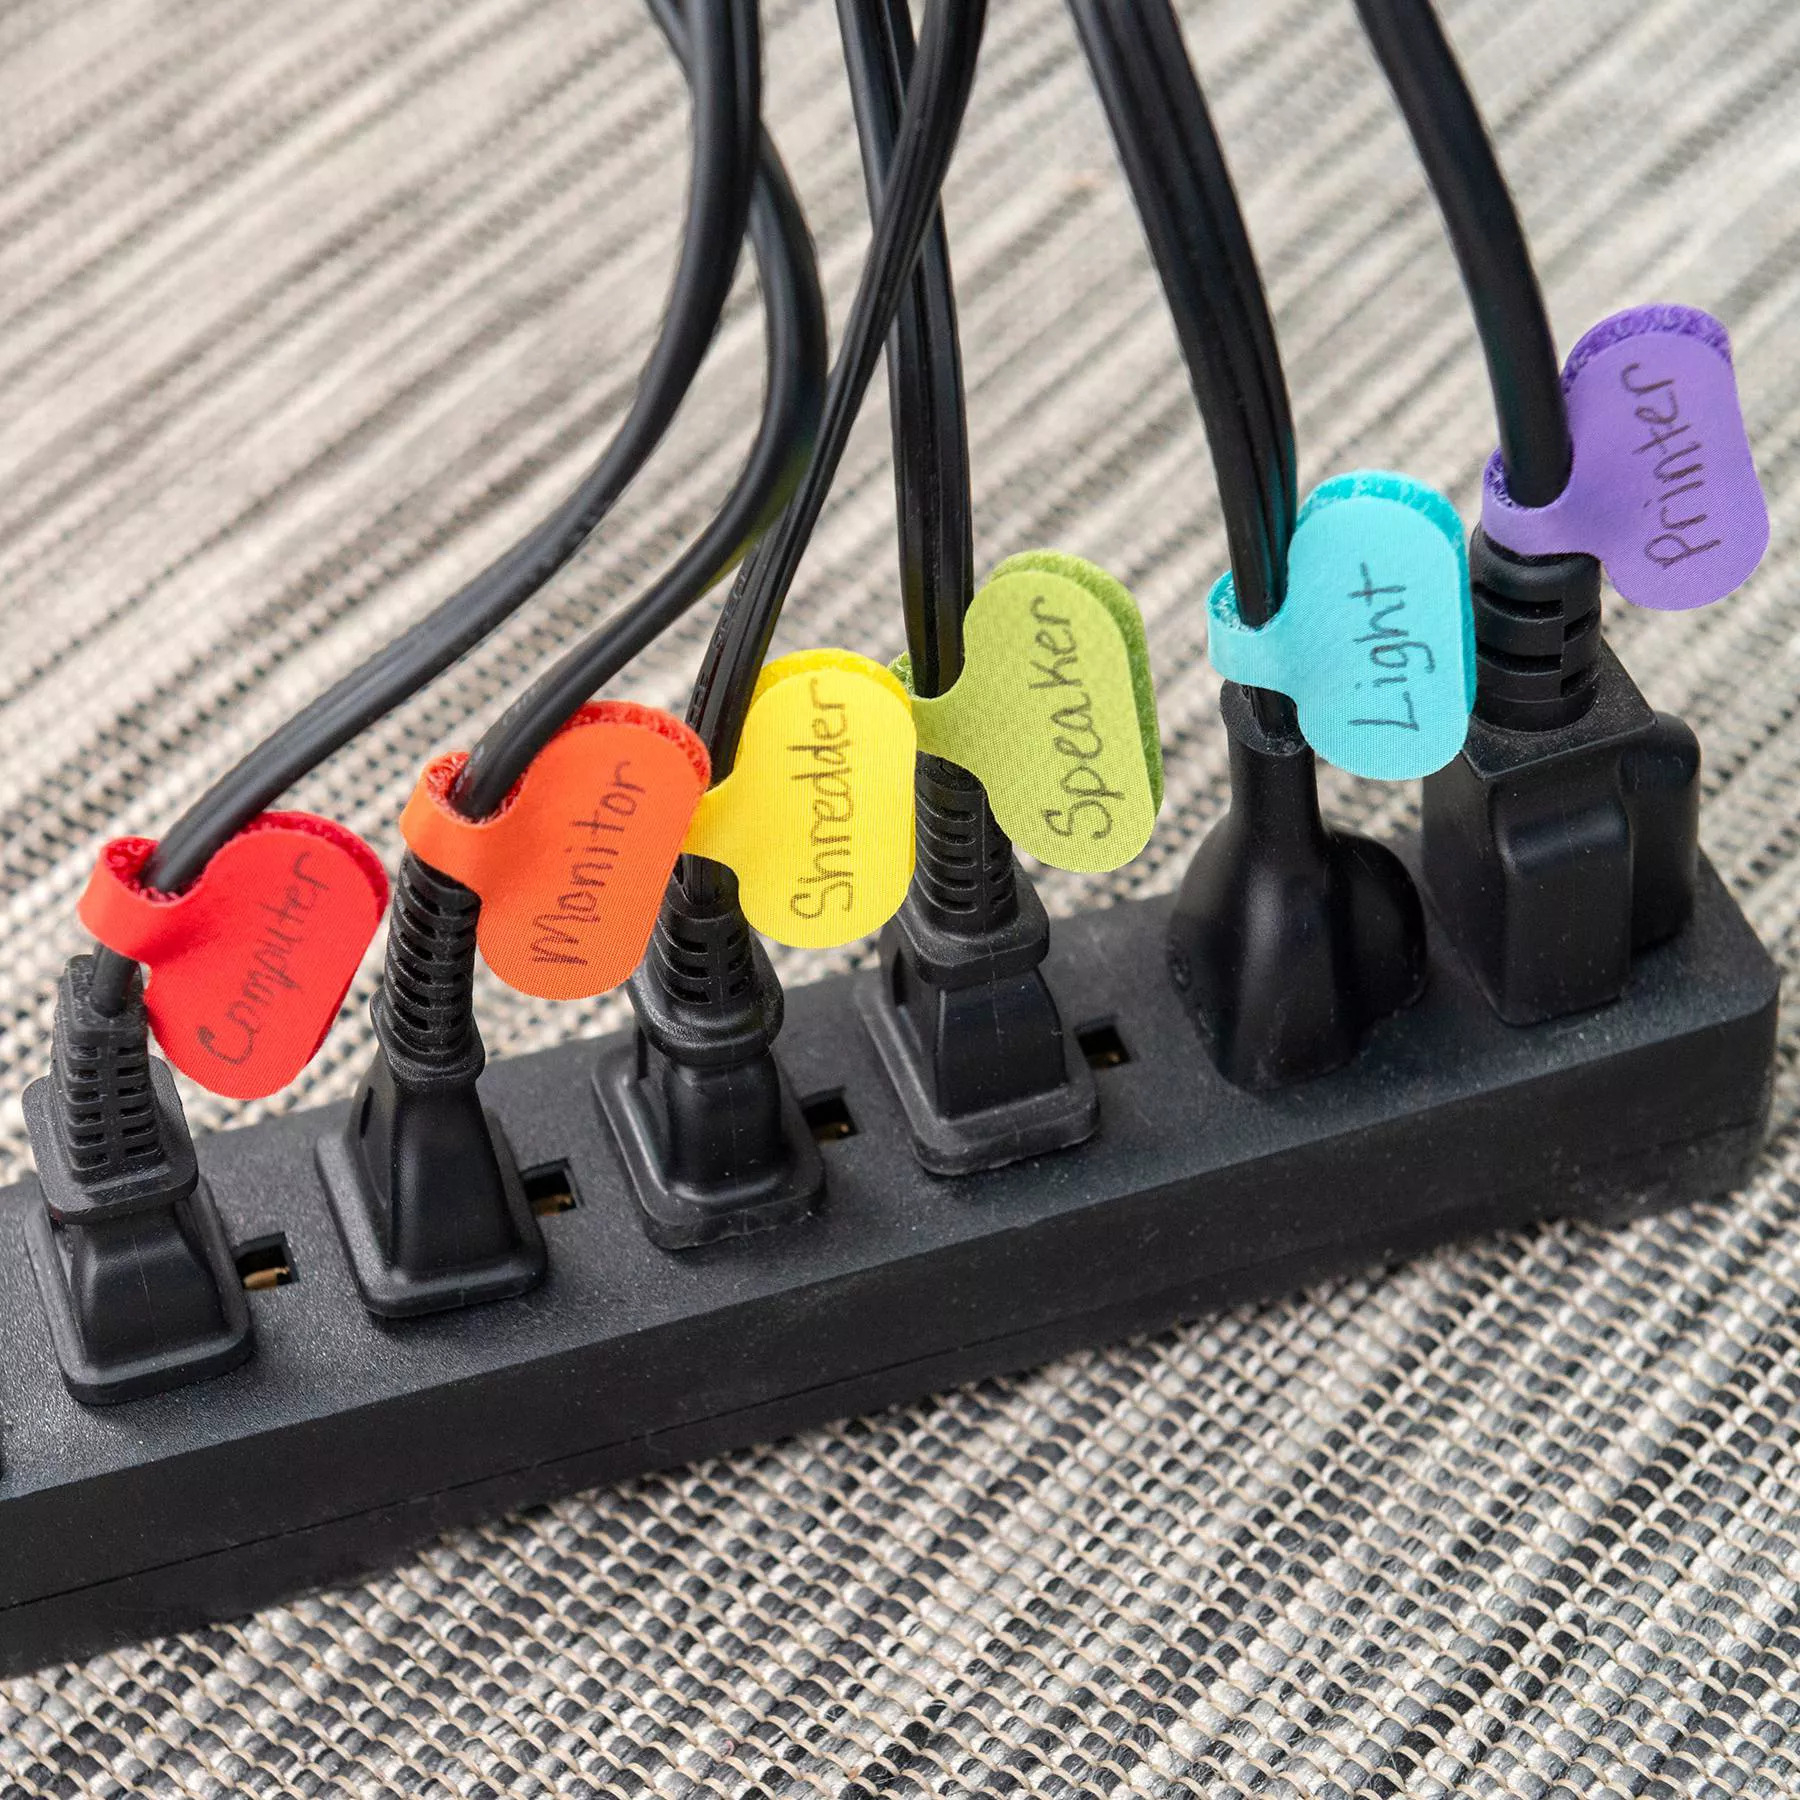 tags affixed to six cables, each a different color with hand-written labels on them such as computer, monitor, speaker